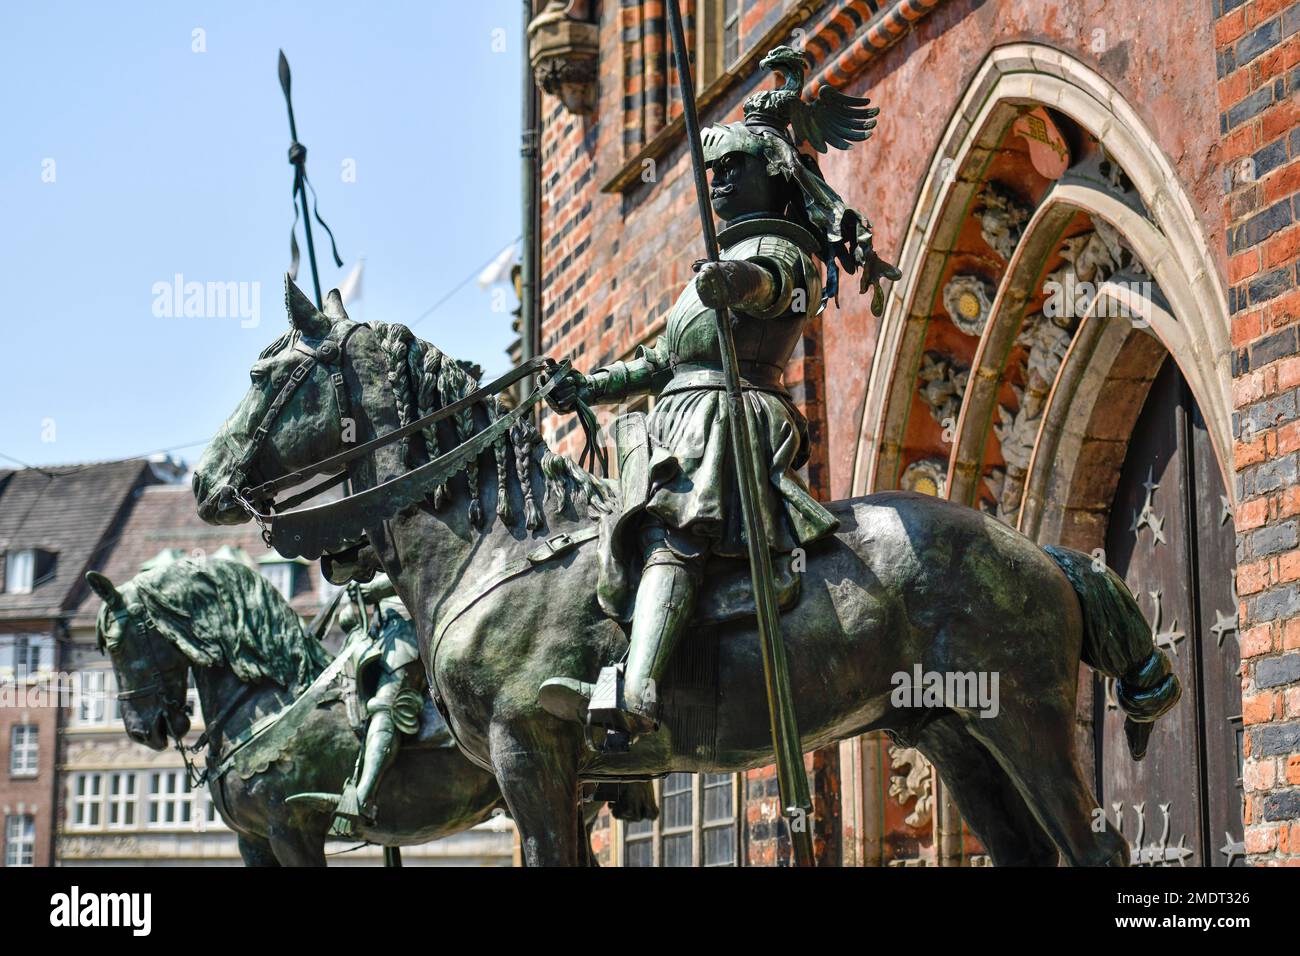 Heralds, East Portal, Old Town Hall, Market Square, Bremen, Germany Stock Photo